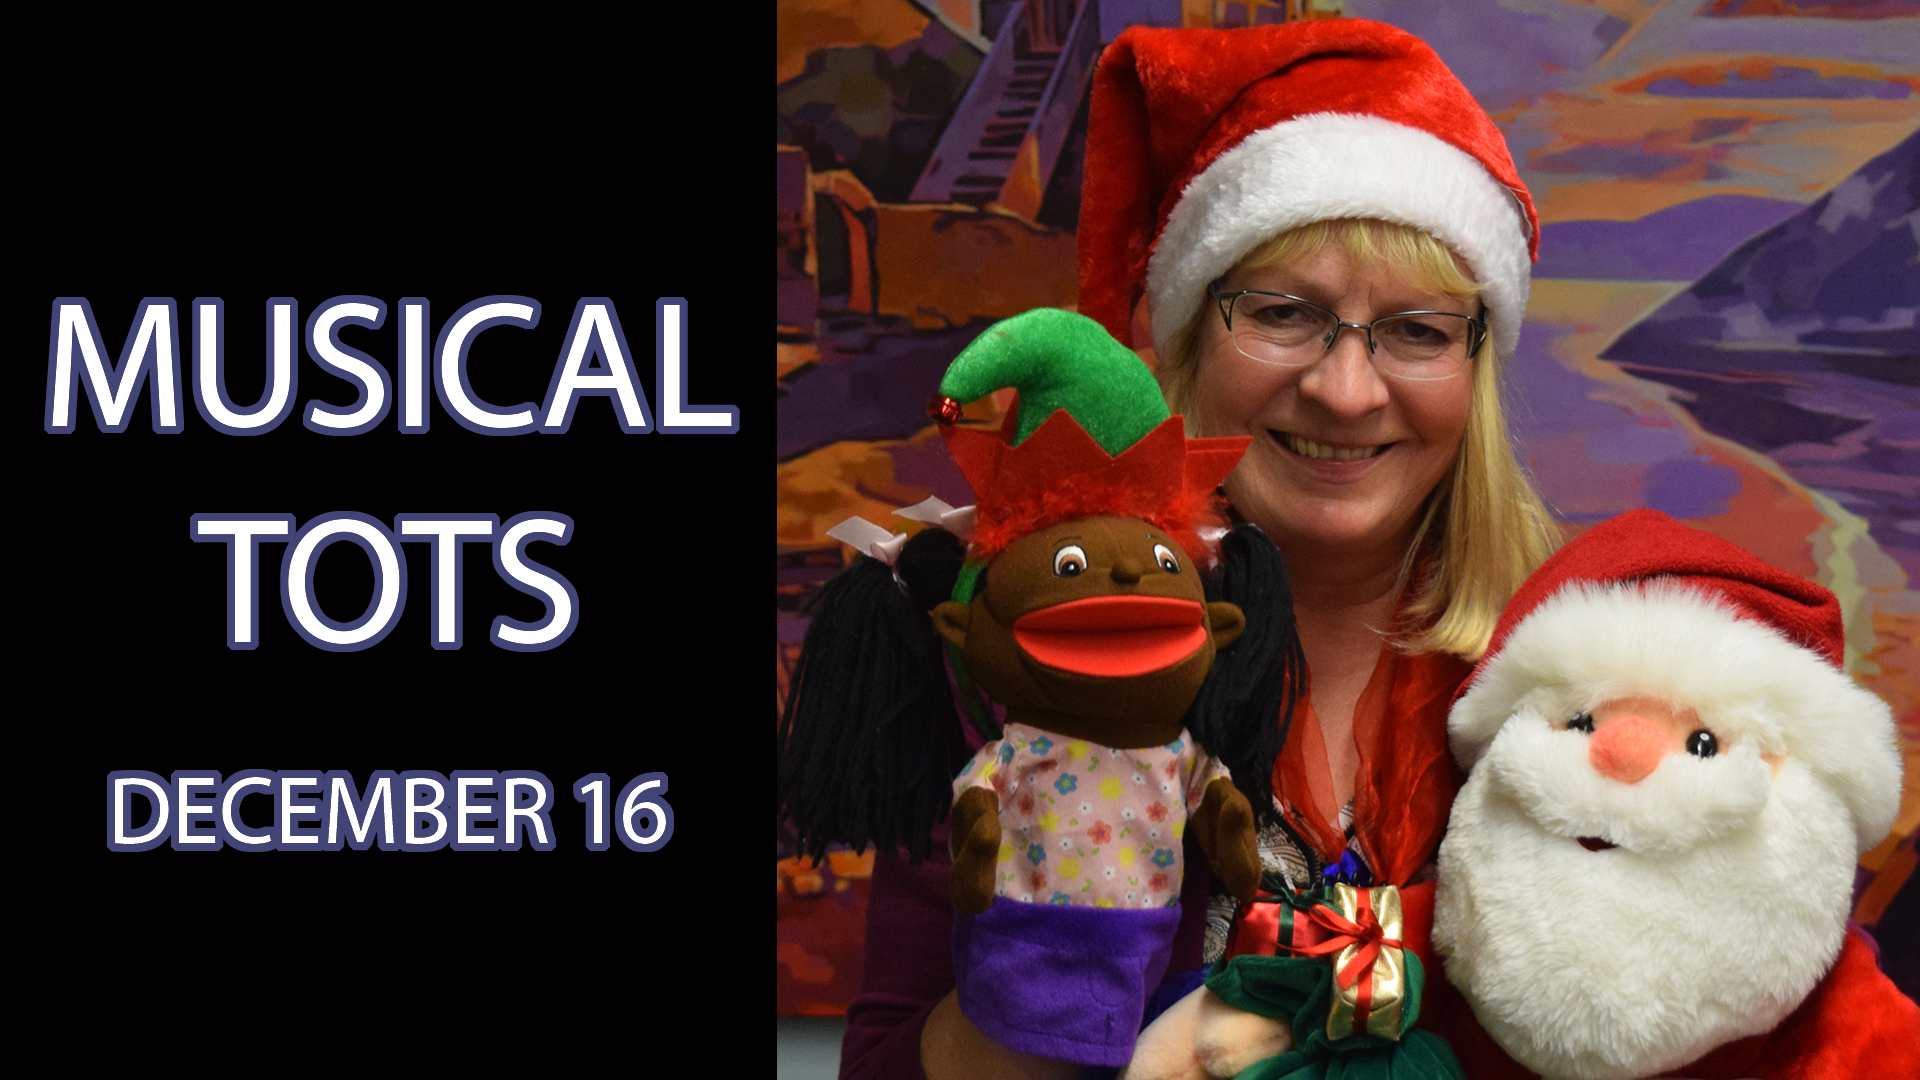 A woman holds a stuffed Santa and a girl puppet next to the text "Musical Tots December 16"